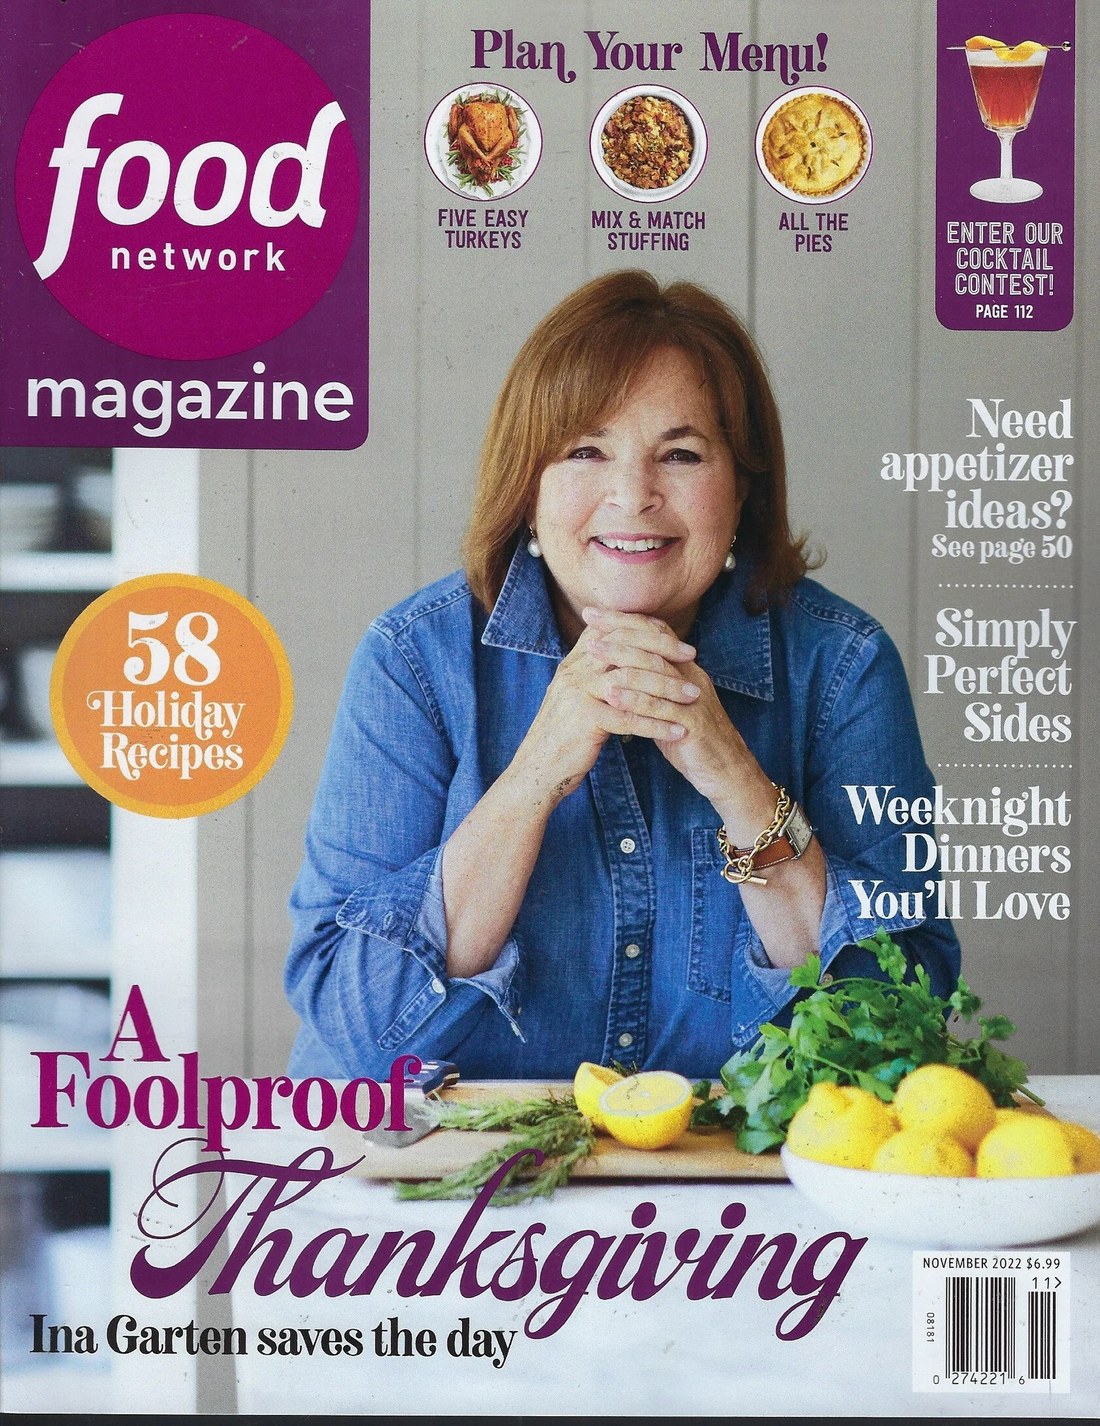 We're featured in Food Network Magazine!